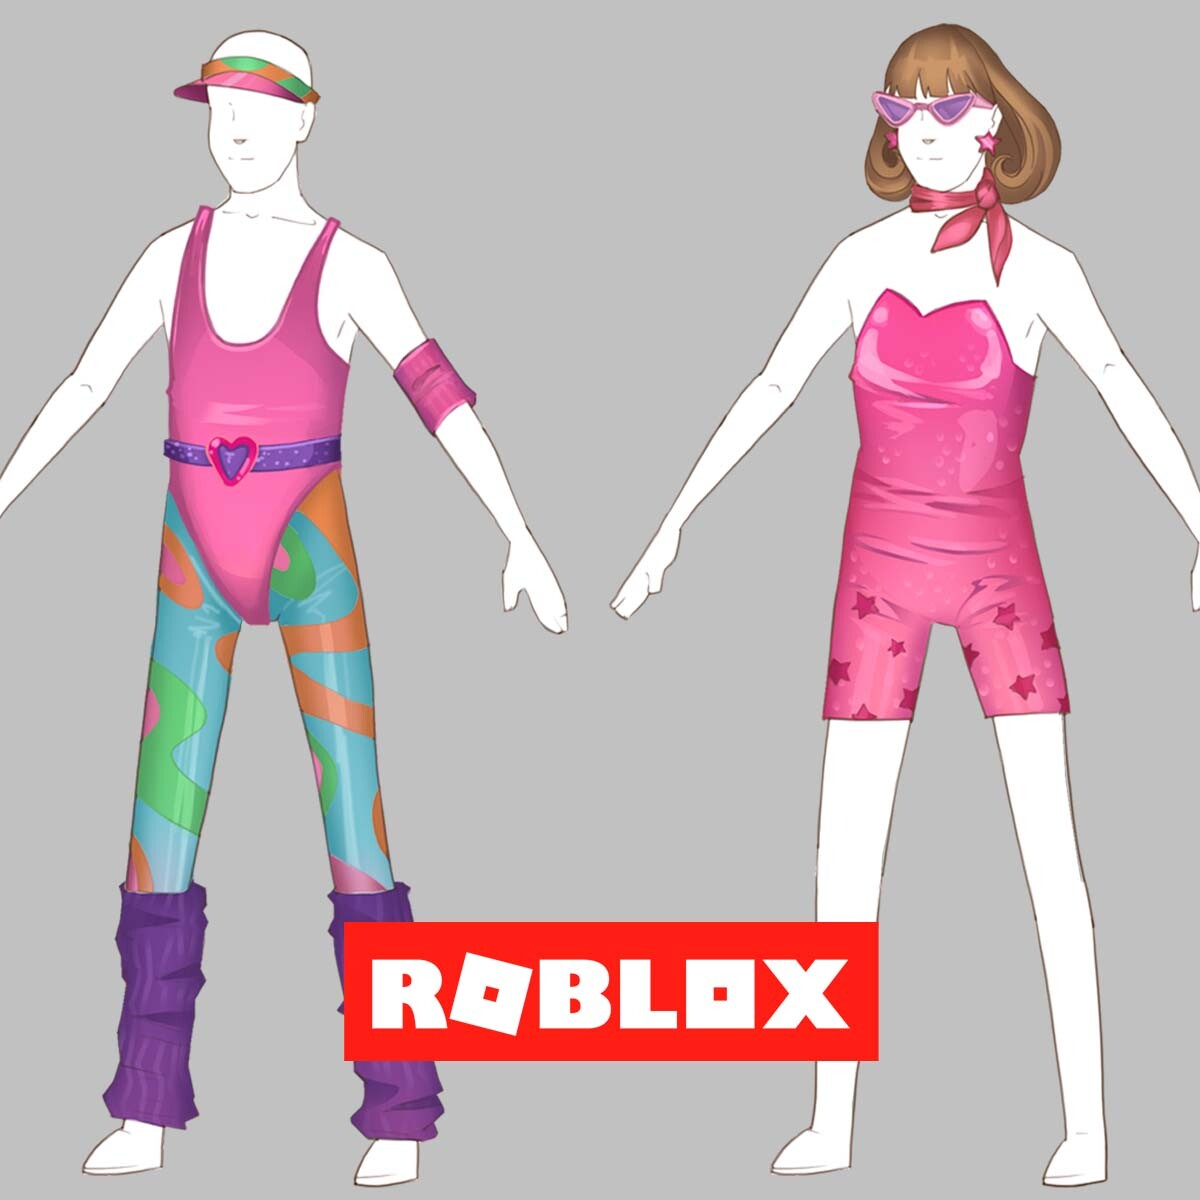 Skin Studio - Skins for Roblox by DreamTeam Apps